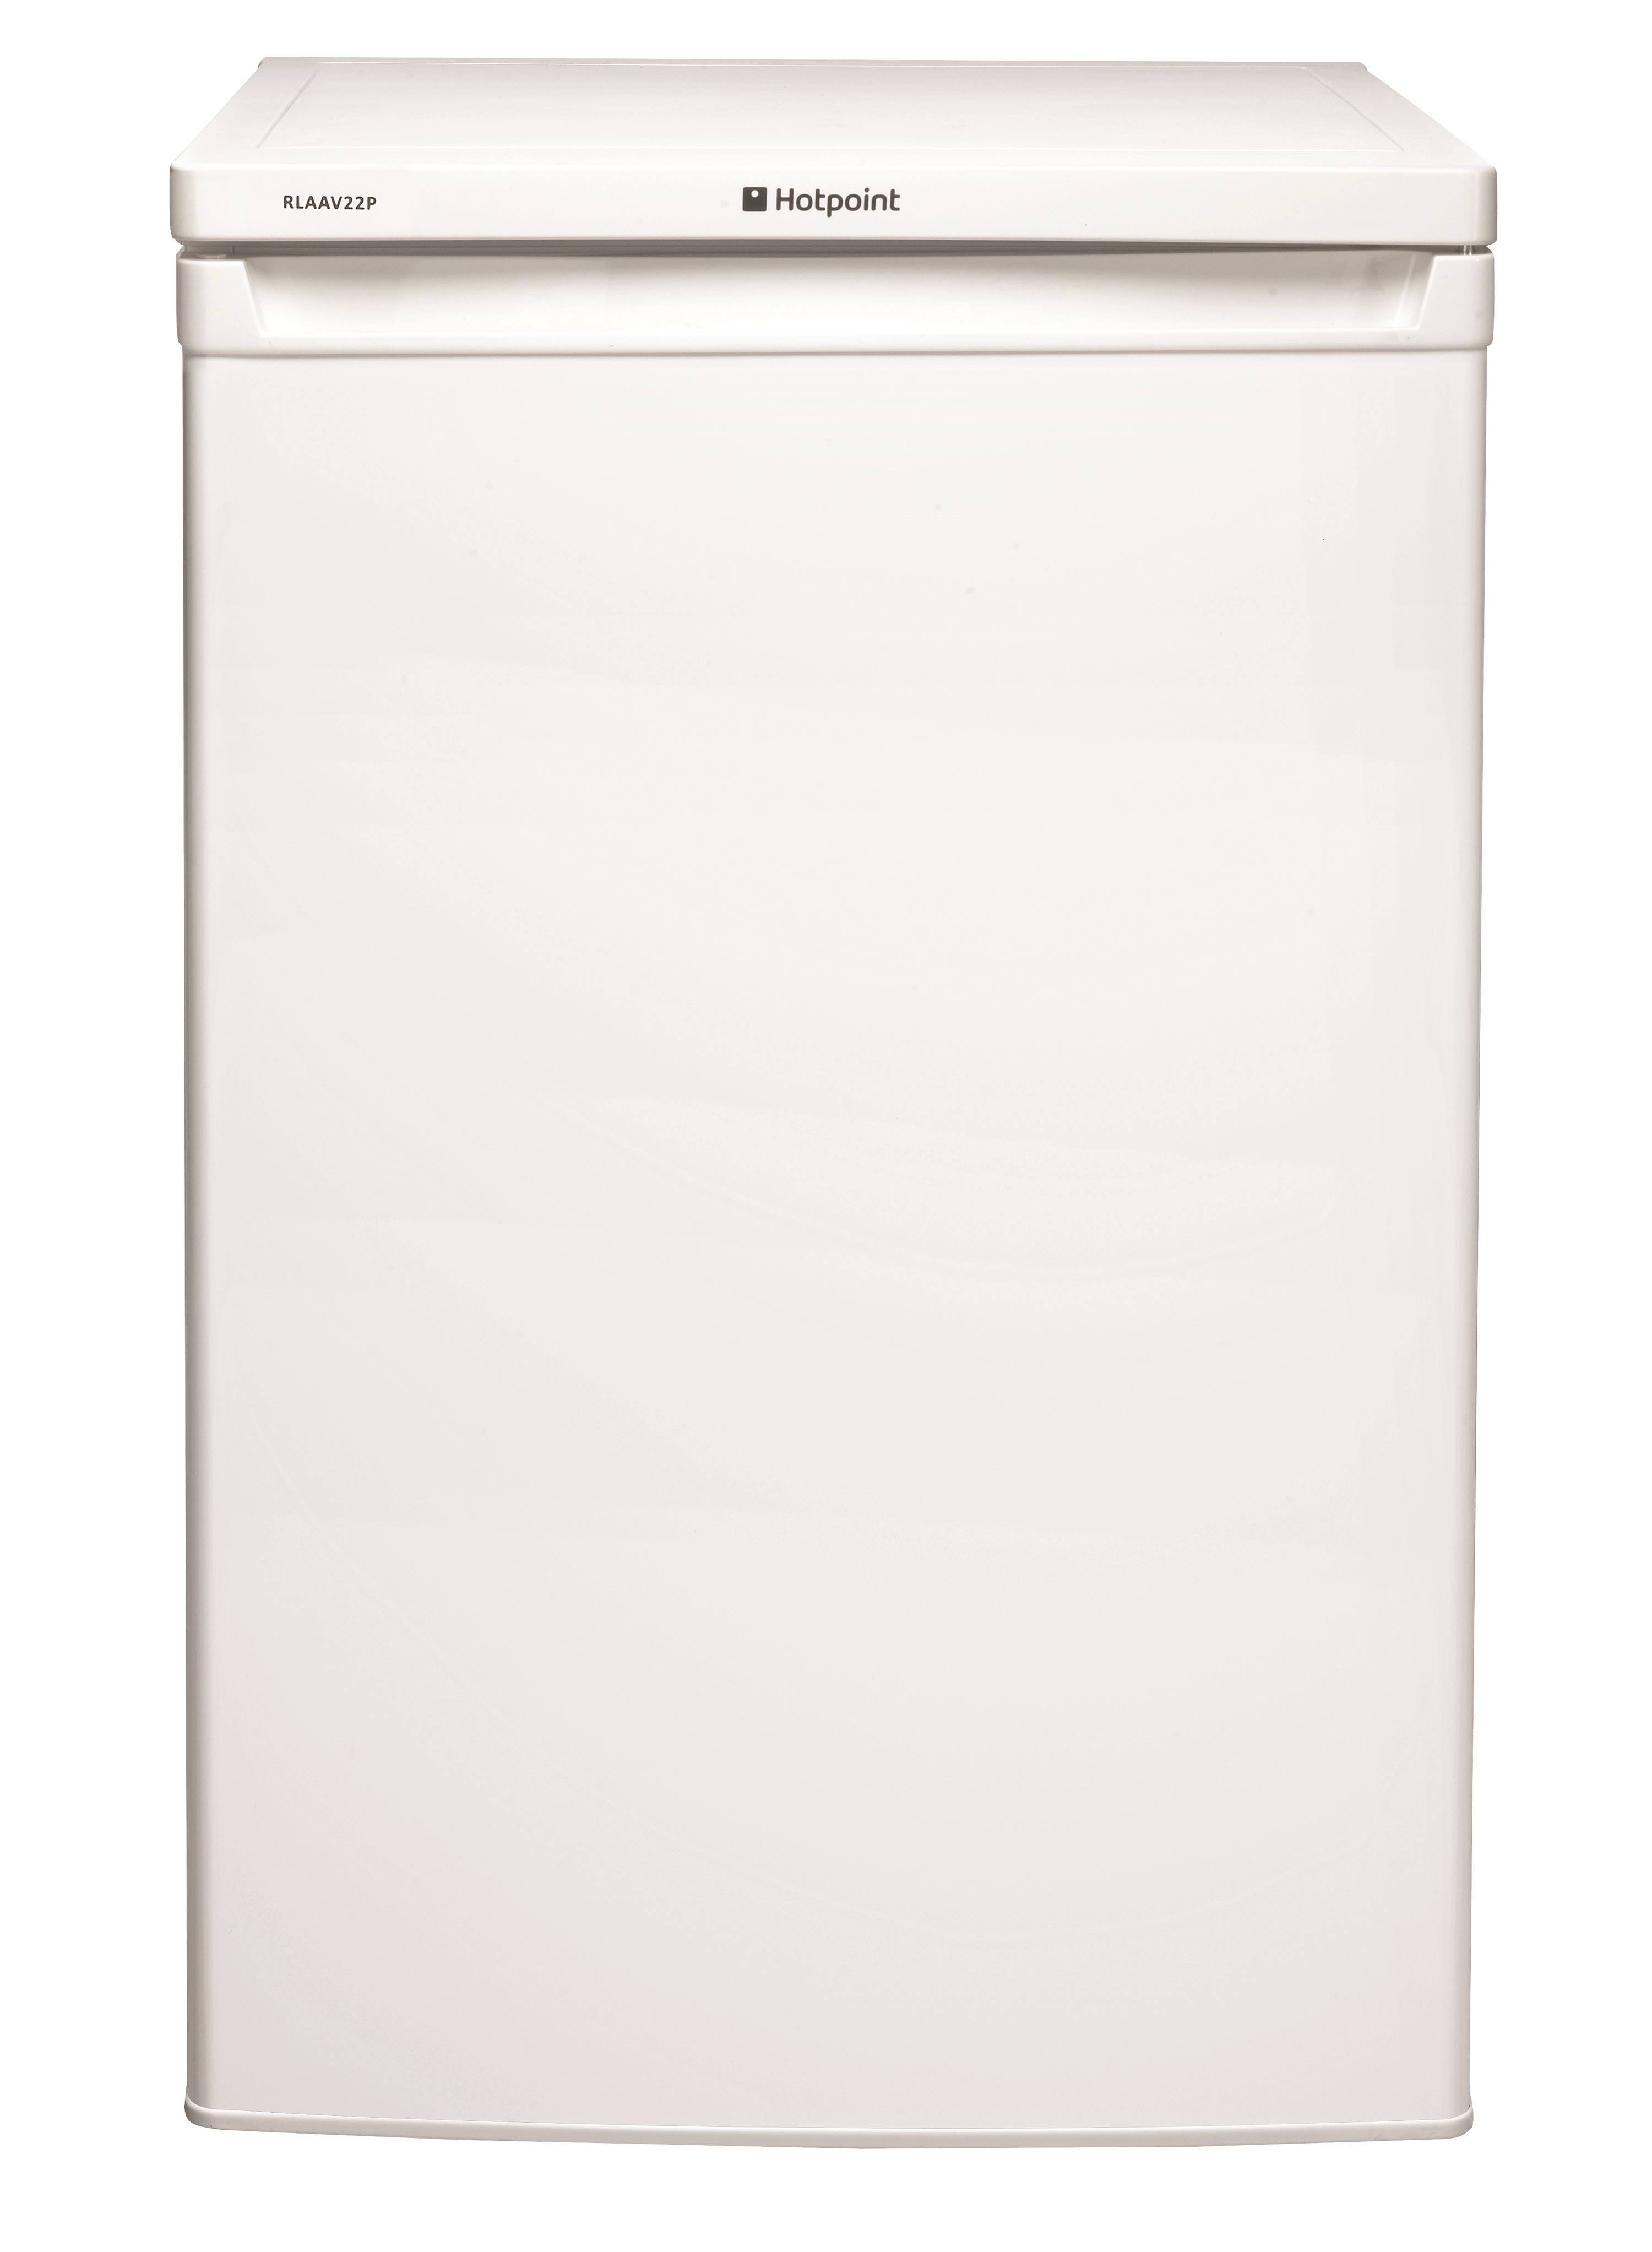 Buy The Hotpoint Rlaav22p Fridges Delivery To Beckenham And The